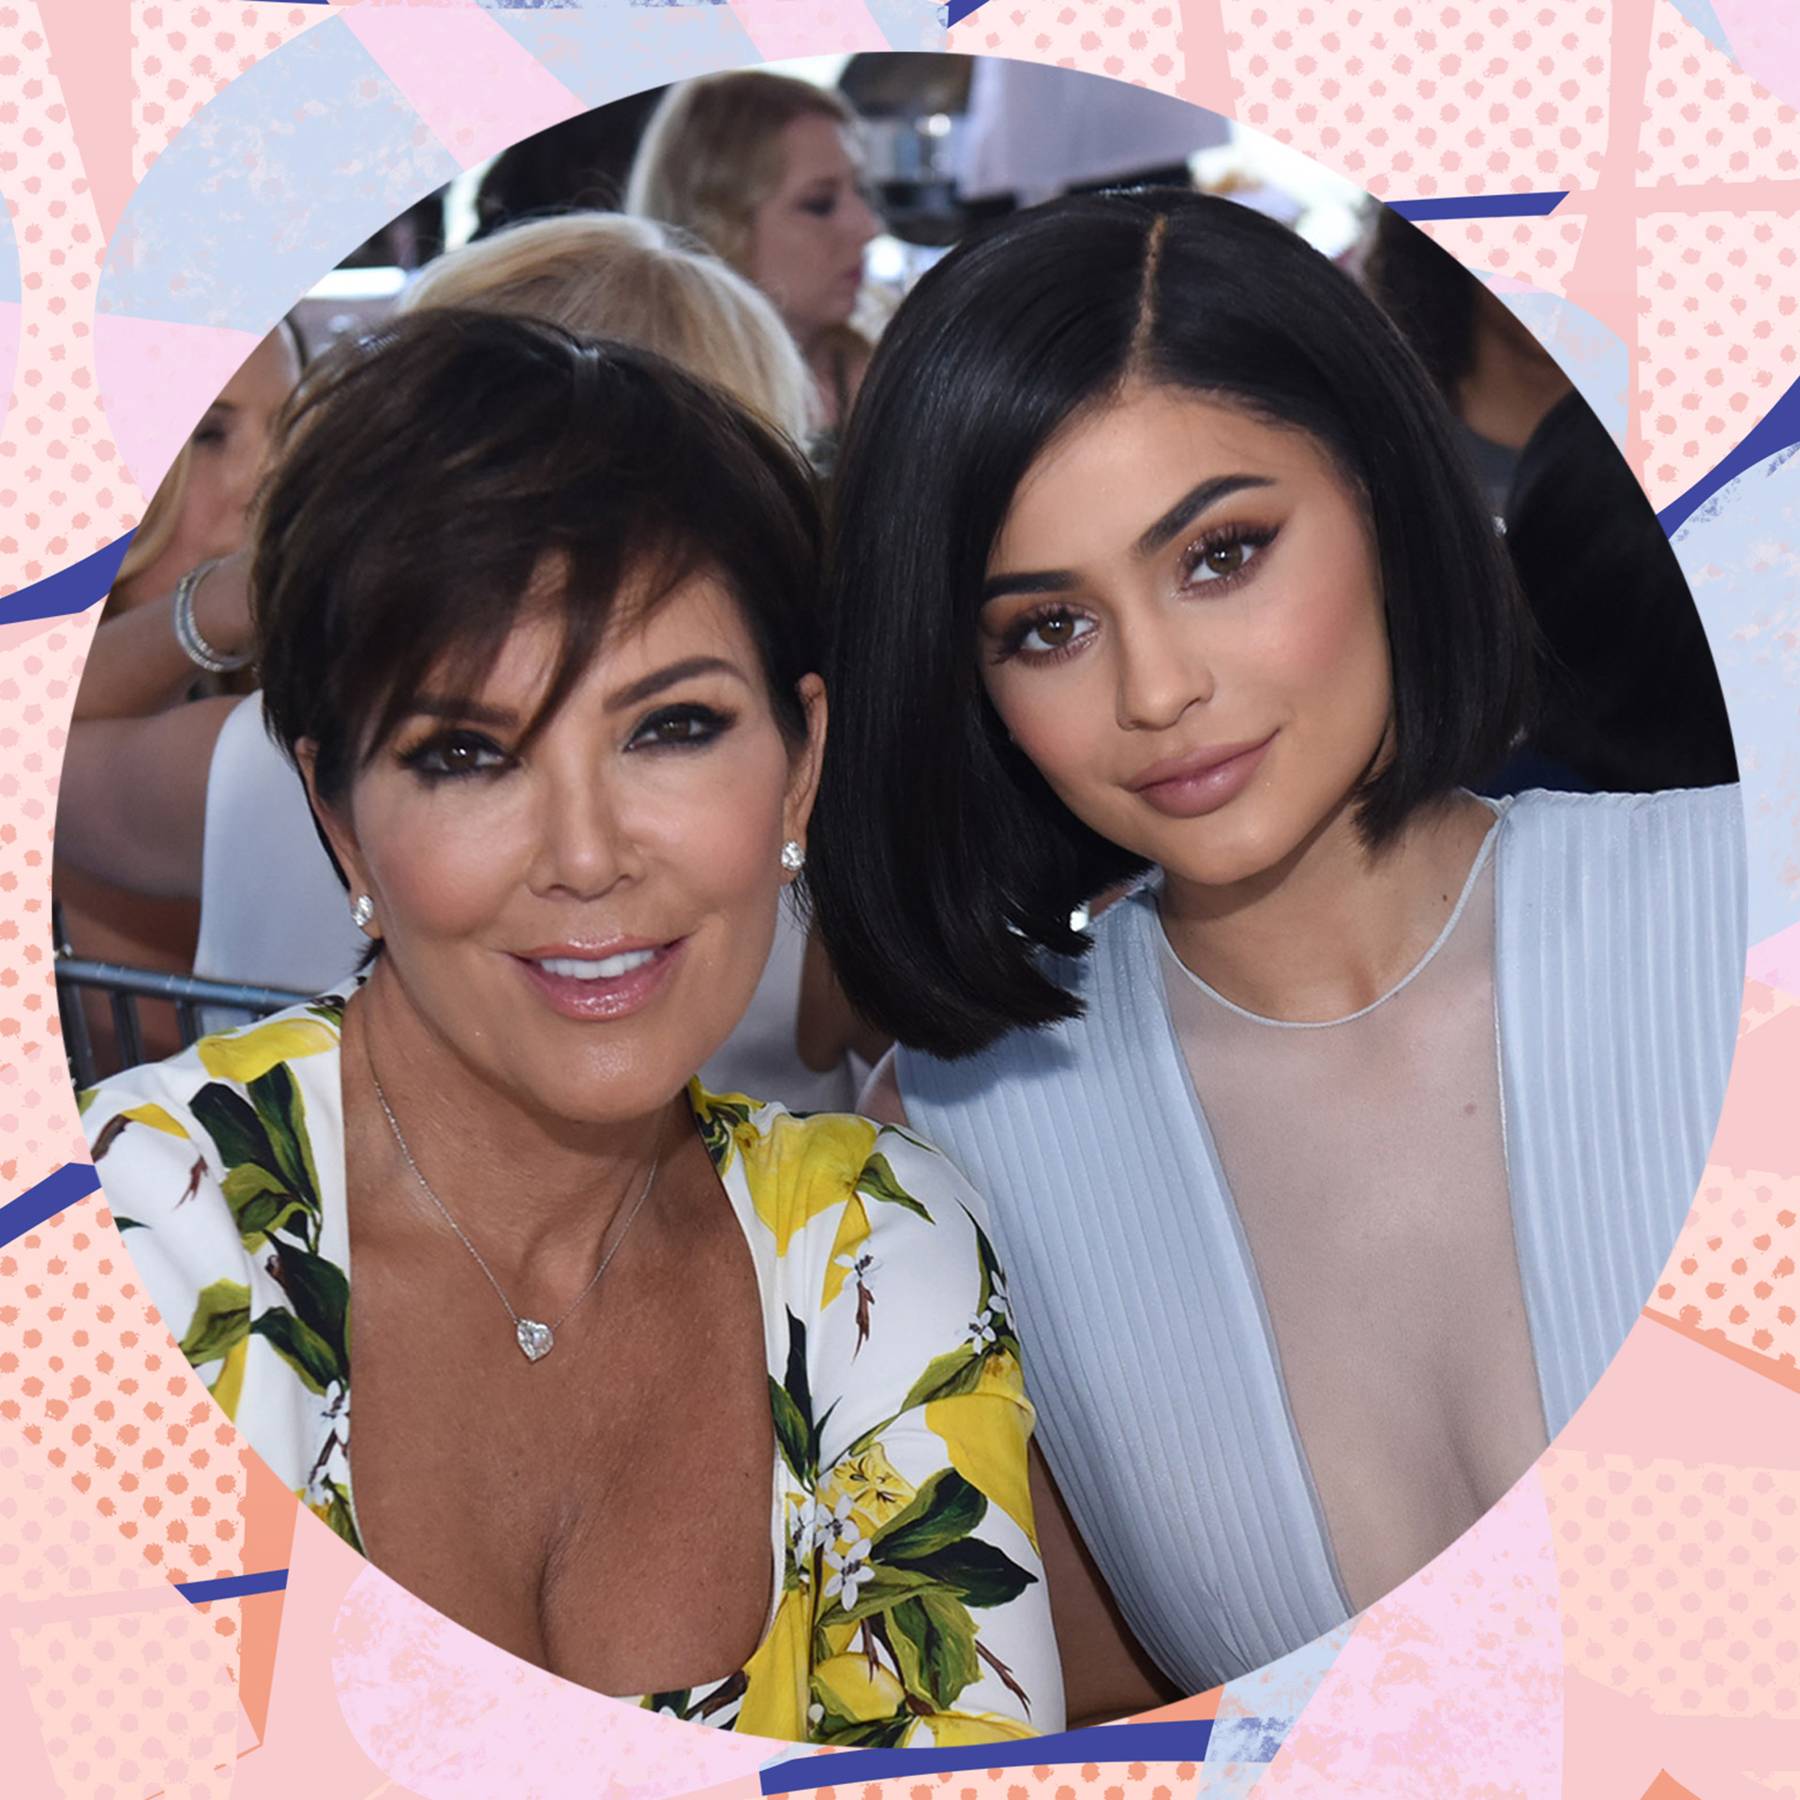 Kylie Jenner Interviewed By Momager Kris Jenner Sharing Funny